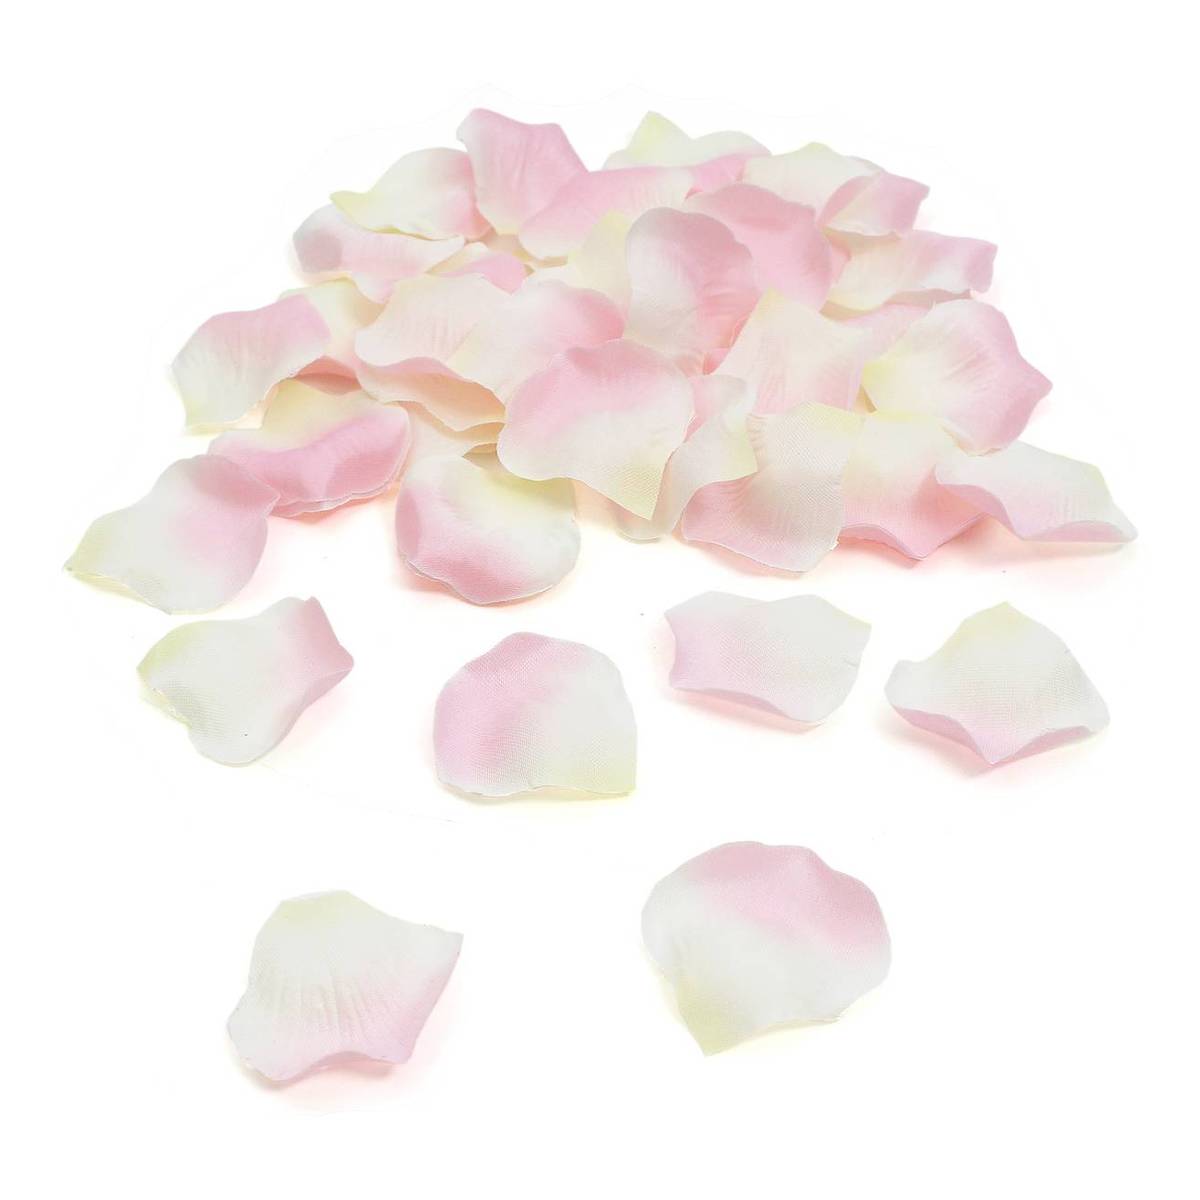 Fresh Pink Rose Petals on White, Top View Stock Photo - Image of natural,  scattered: 173065392